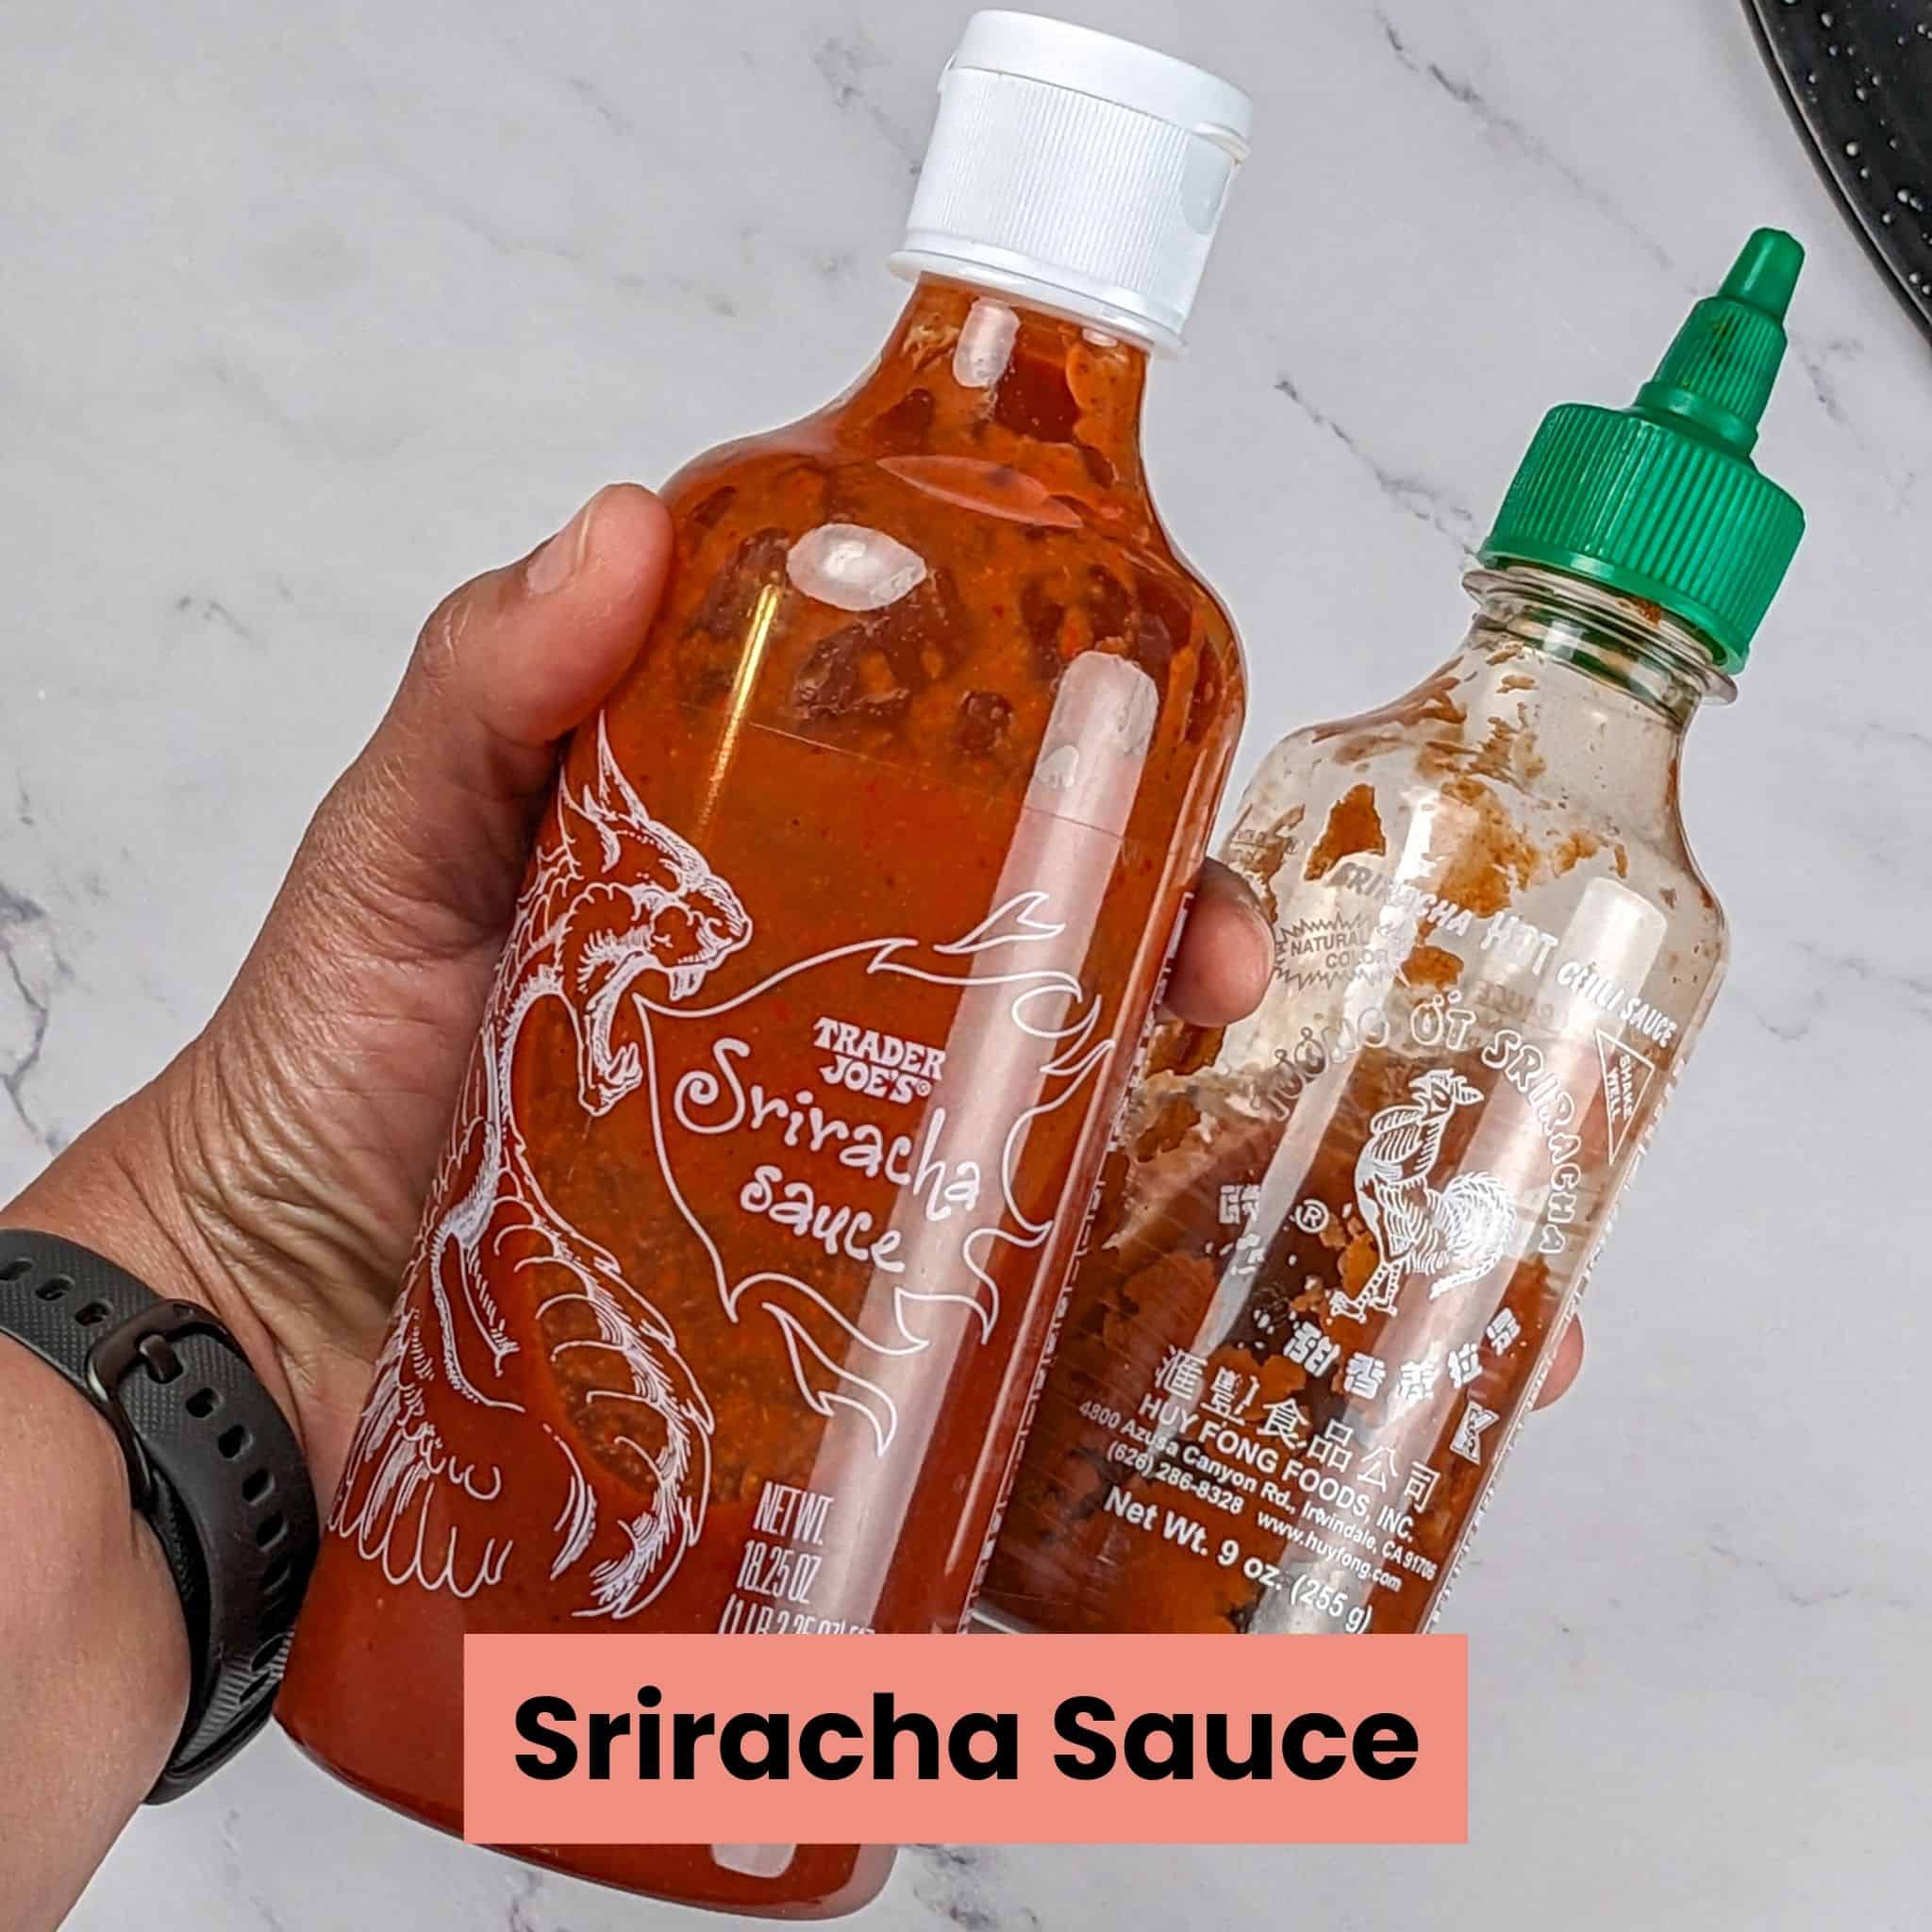 two types of sriracha sauce held in the hand, left one is Trader Joe's and the right one is Huy Fong's.